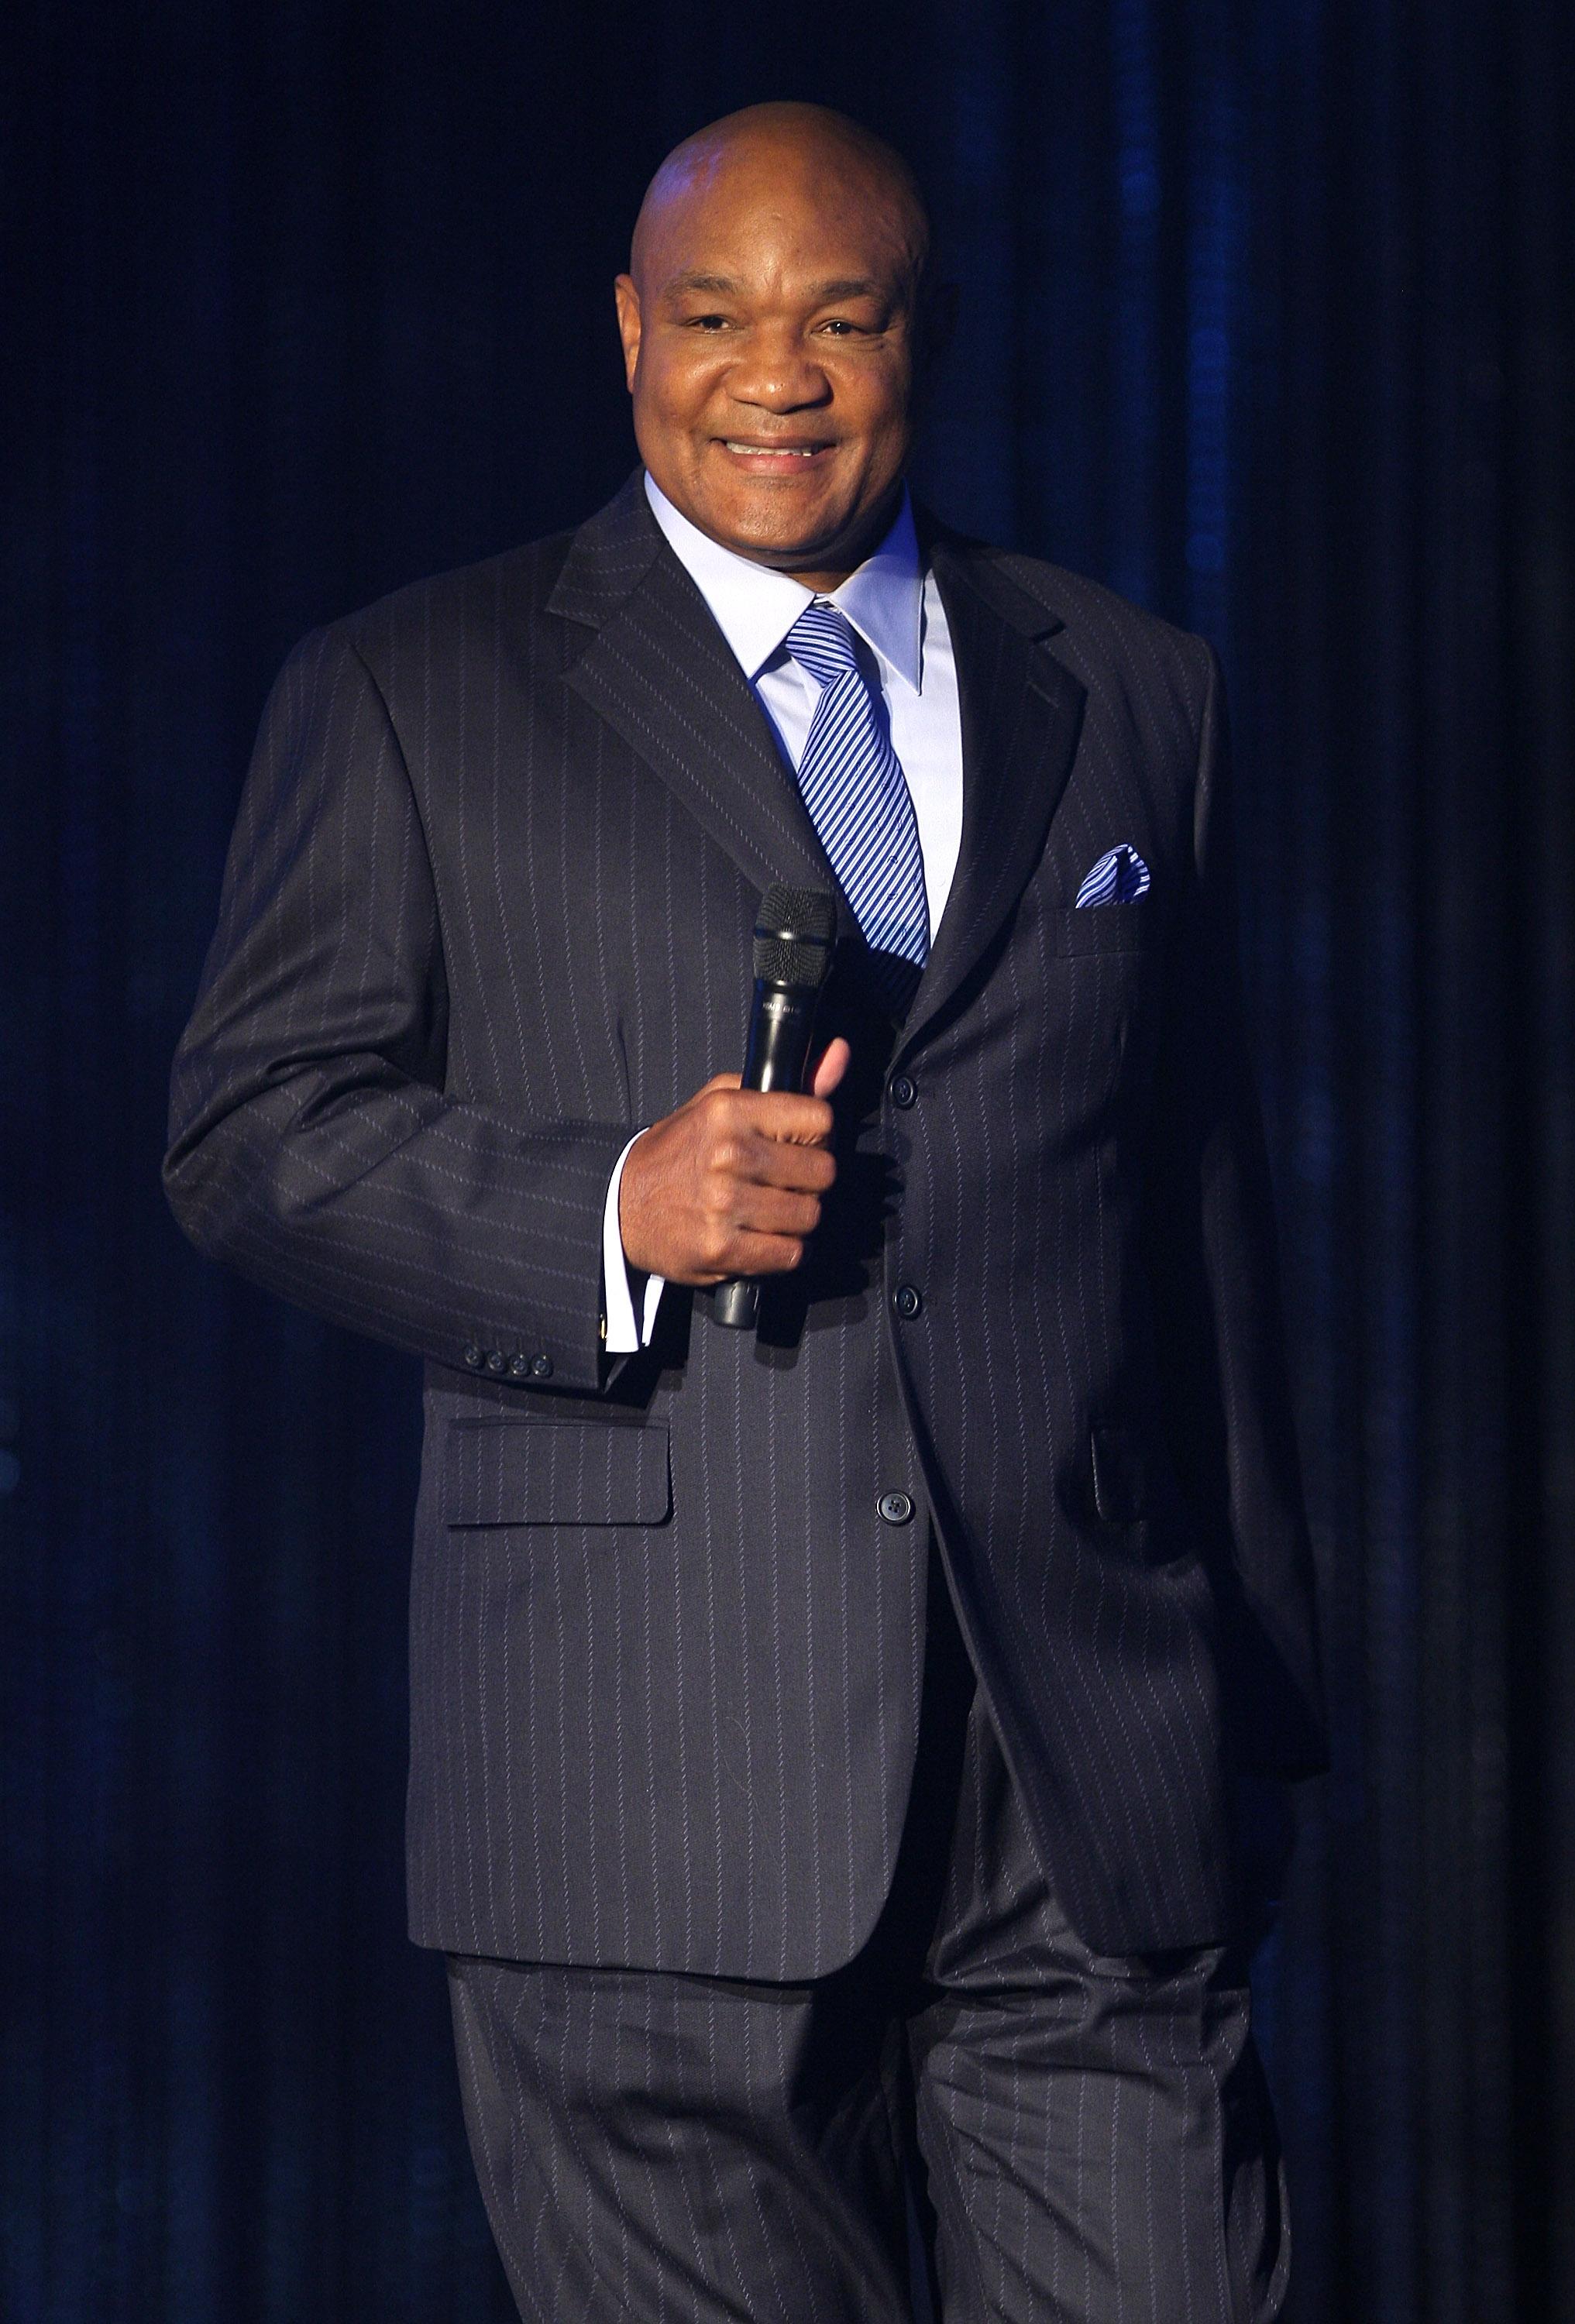 George Foreman challenges Steven Seagal to a fight in Las Vegas - CBS News2033 x 3000